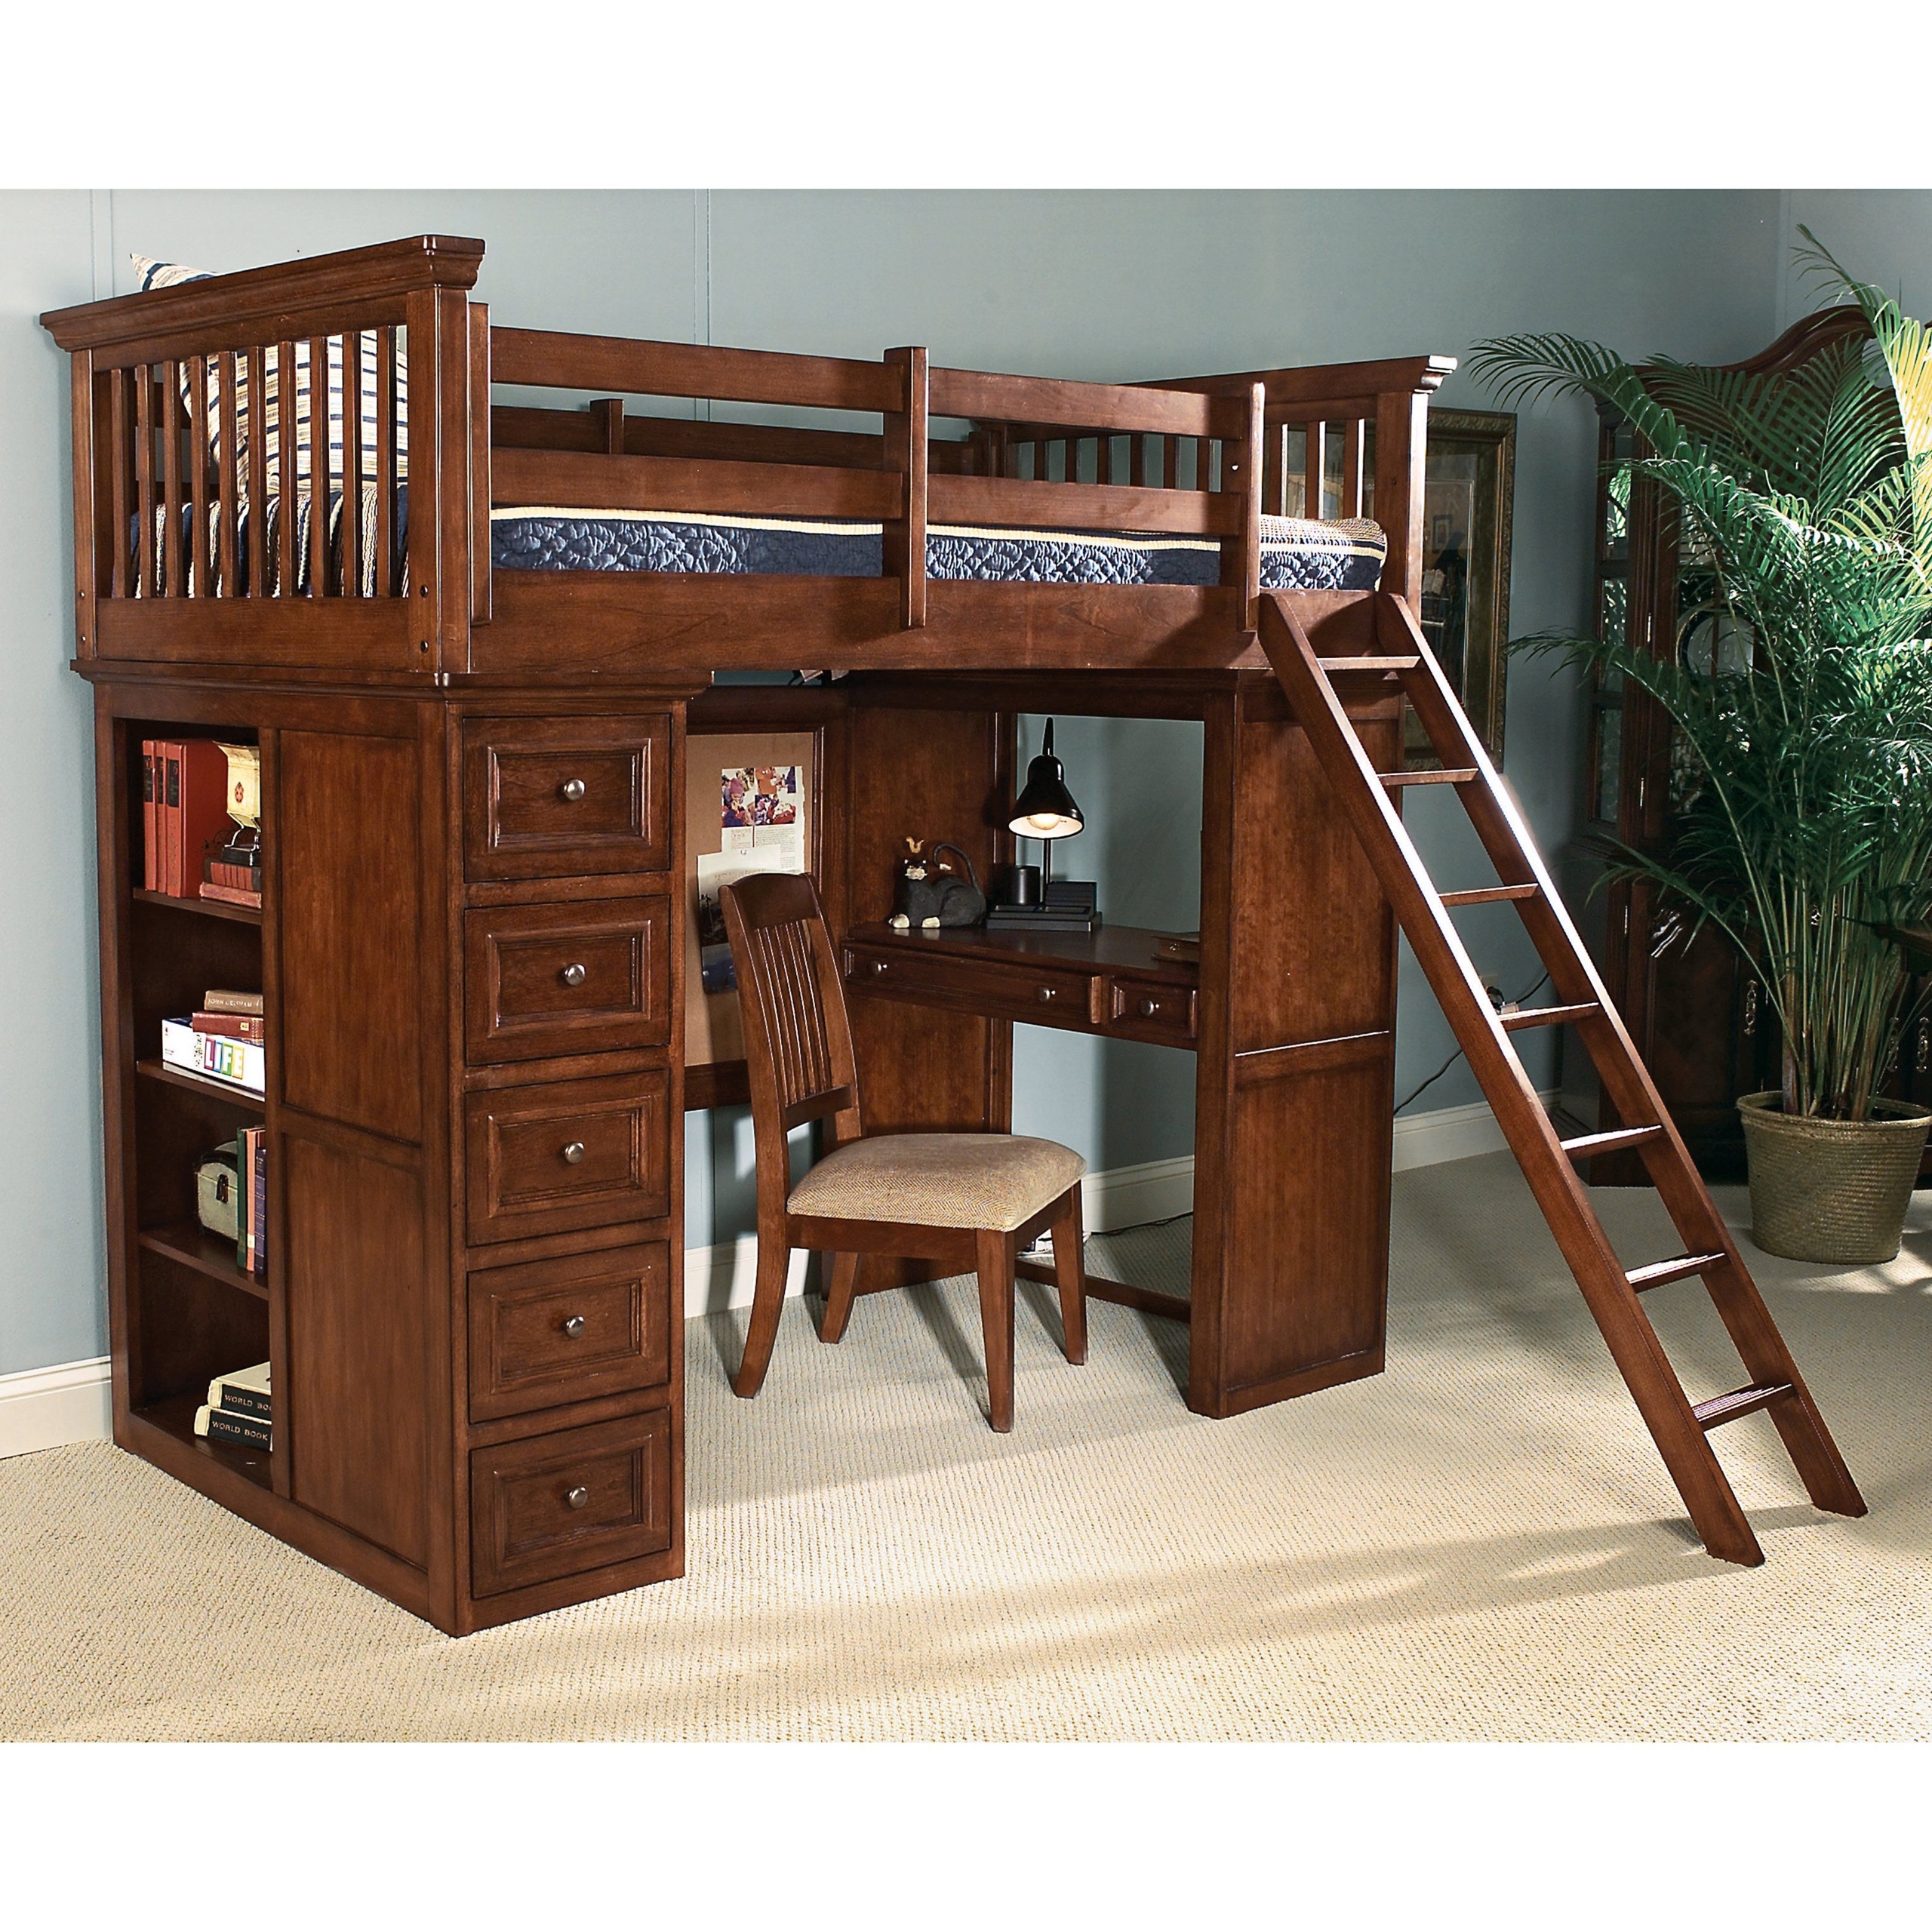 Full Size Loft Bed With Desk Visualhunt, Wooden Bunk Bed With Desk And Drawers